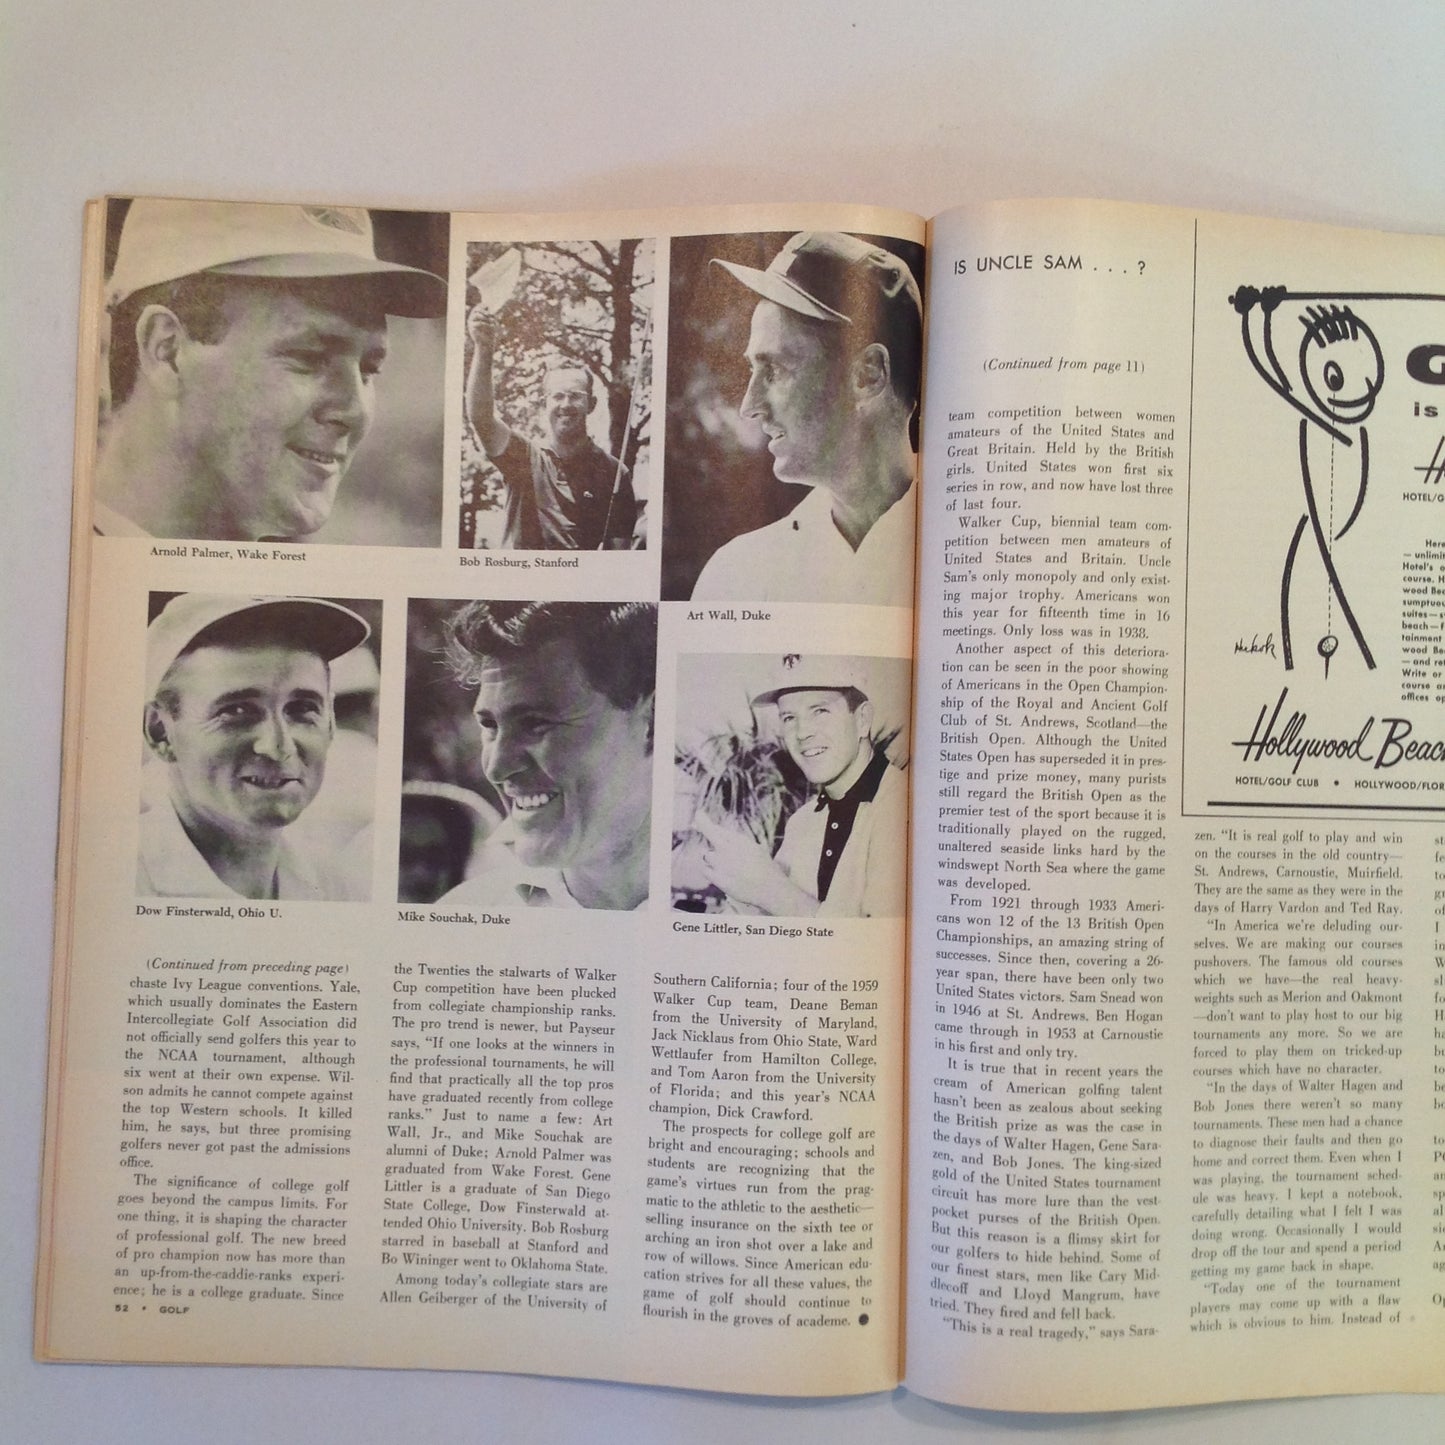 Vintage November 1959 GOLF Magazine The Shank Are Your Eyes Hurting Your Score